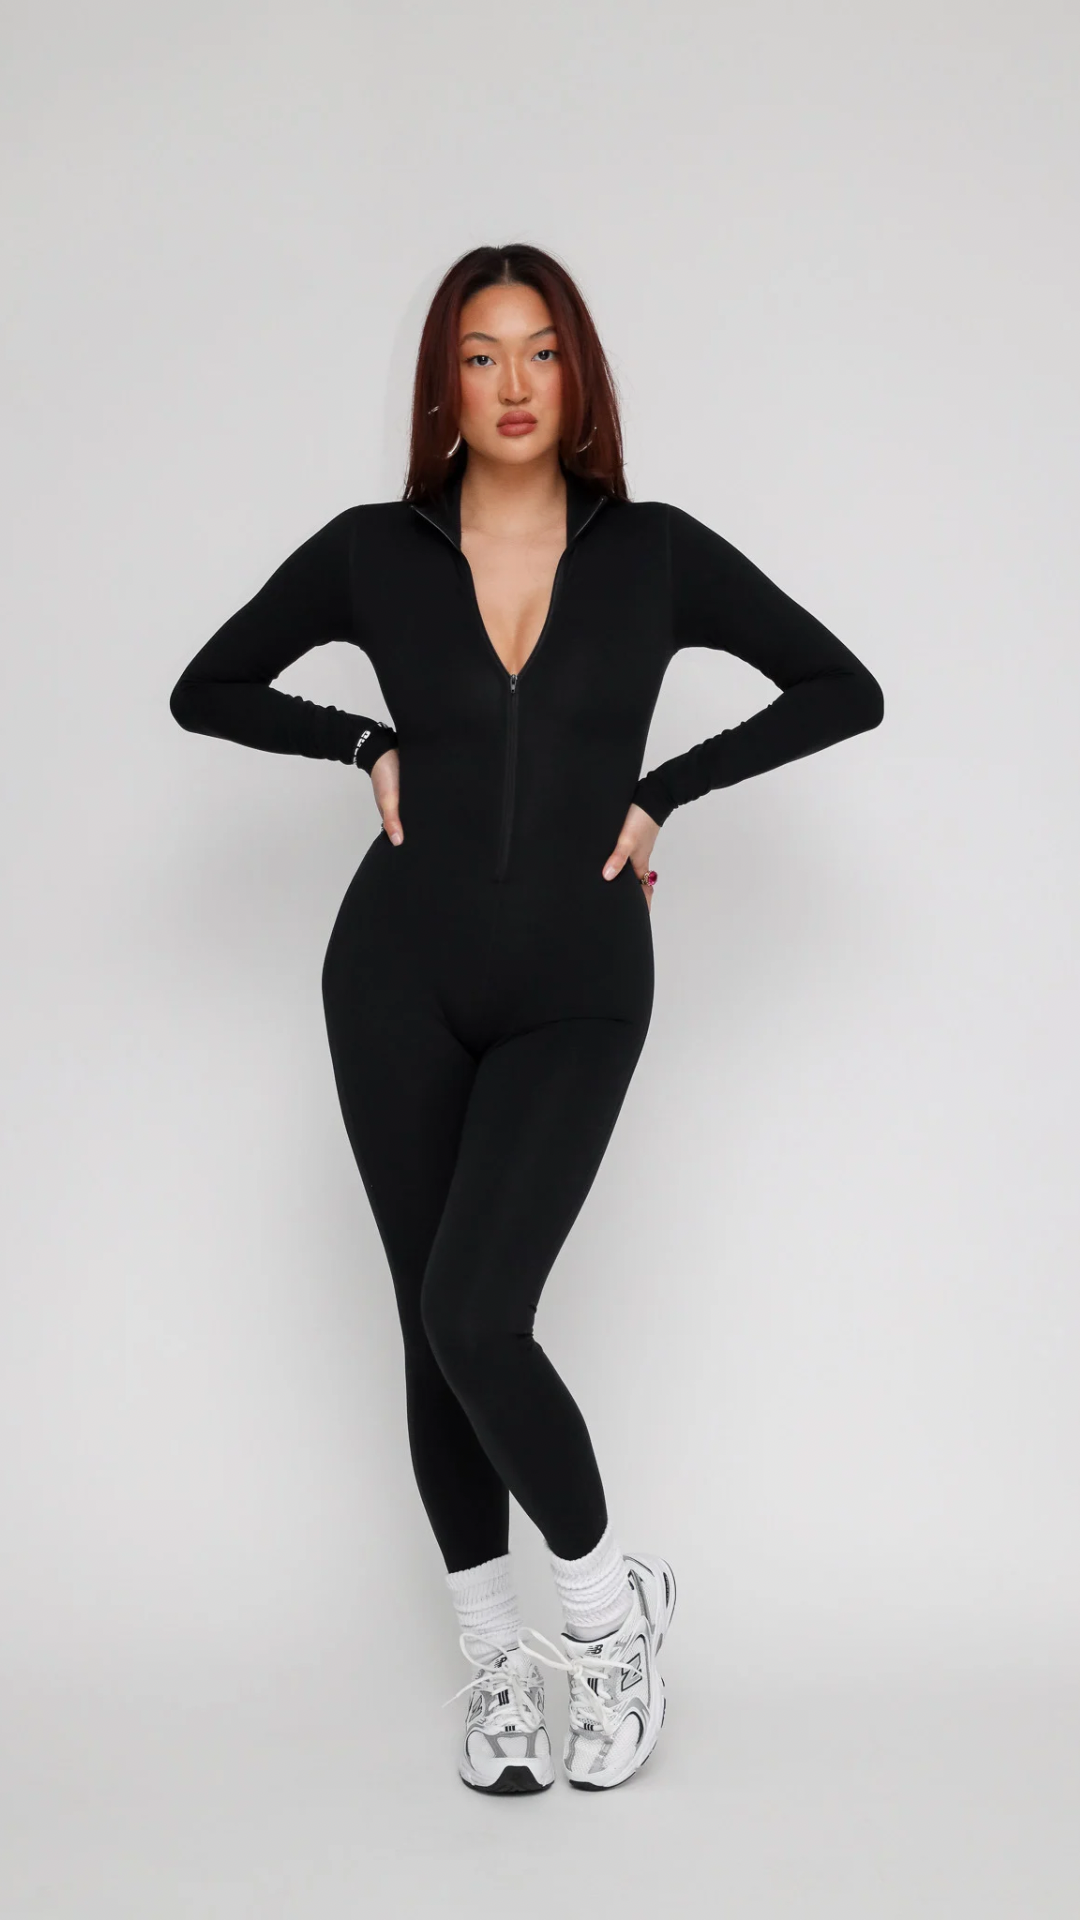 25 Outfits That'll Make You Want a Bodysuit ASAP  Long sleeves bodysuit  outfit, Body suit outfits, Outfits with leggings